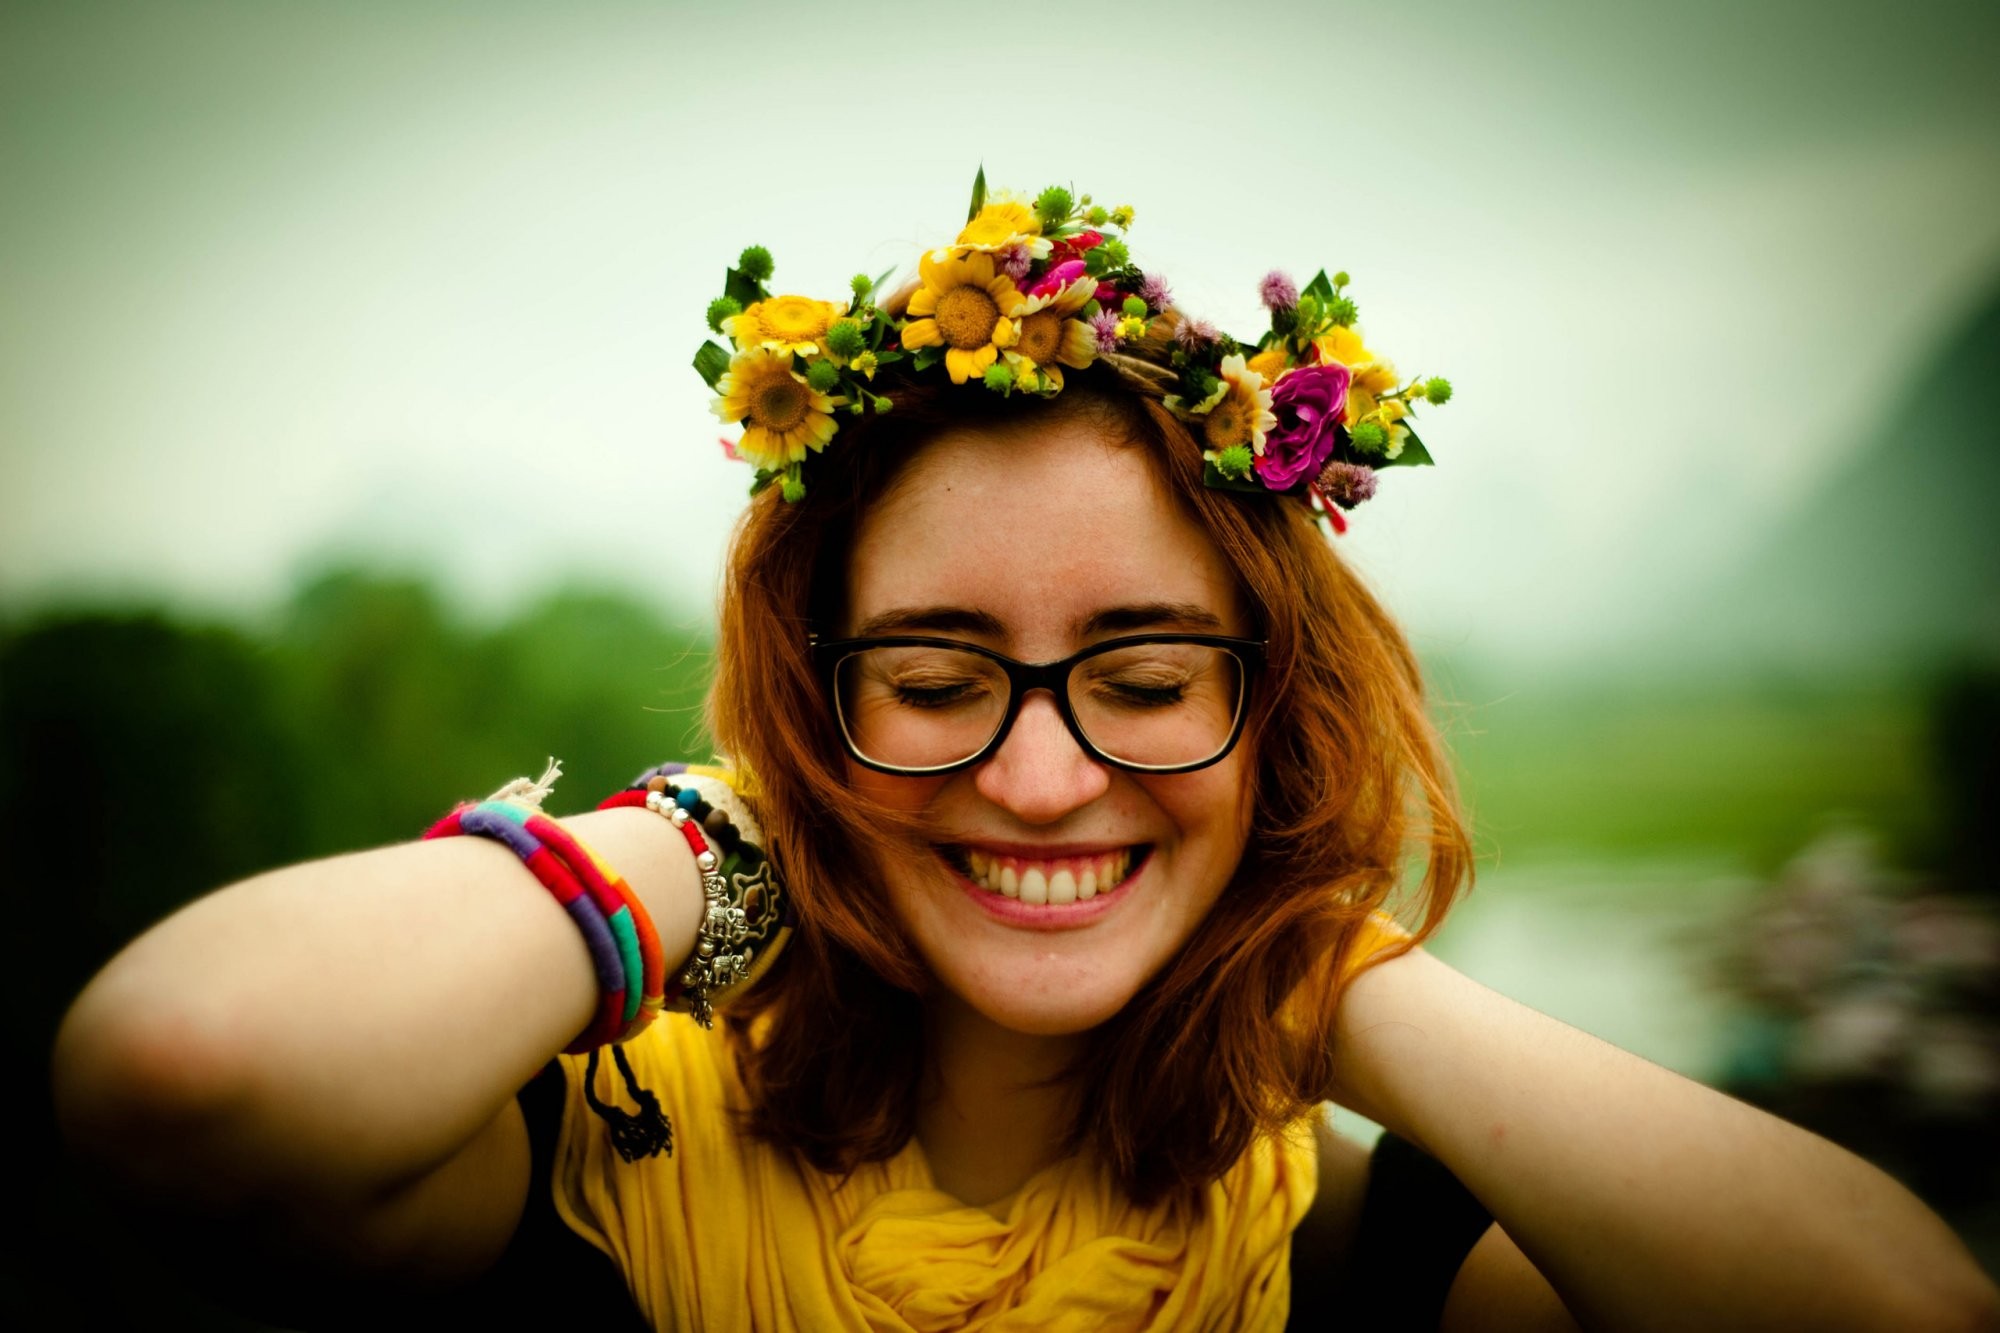 People 2000x1333 women flower in hair closed eyes smiling glasses women with glasses Michele James happy flower crown model women outdoors face portrait green background